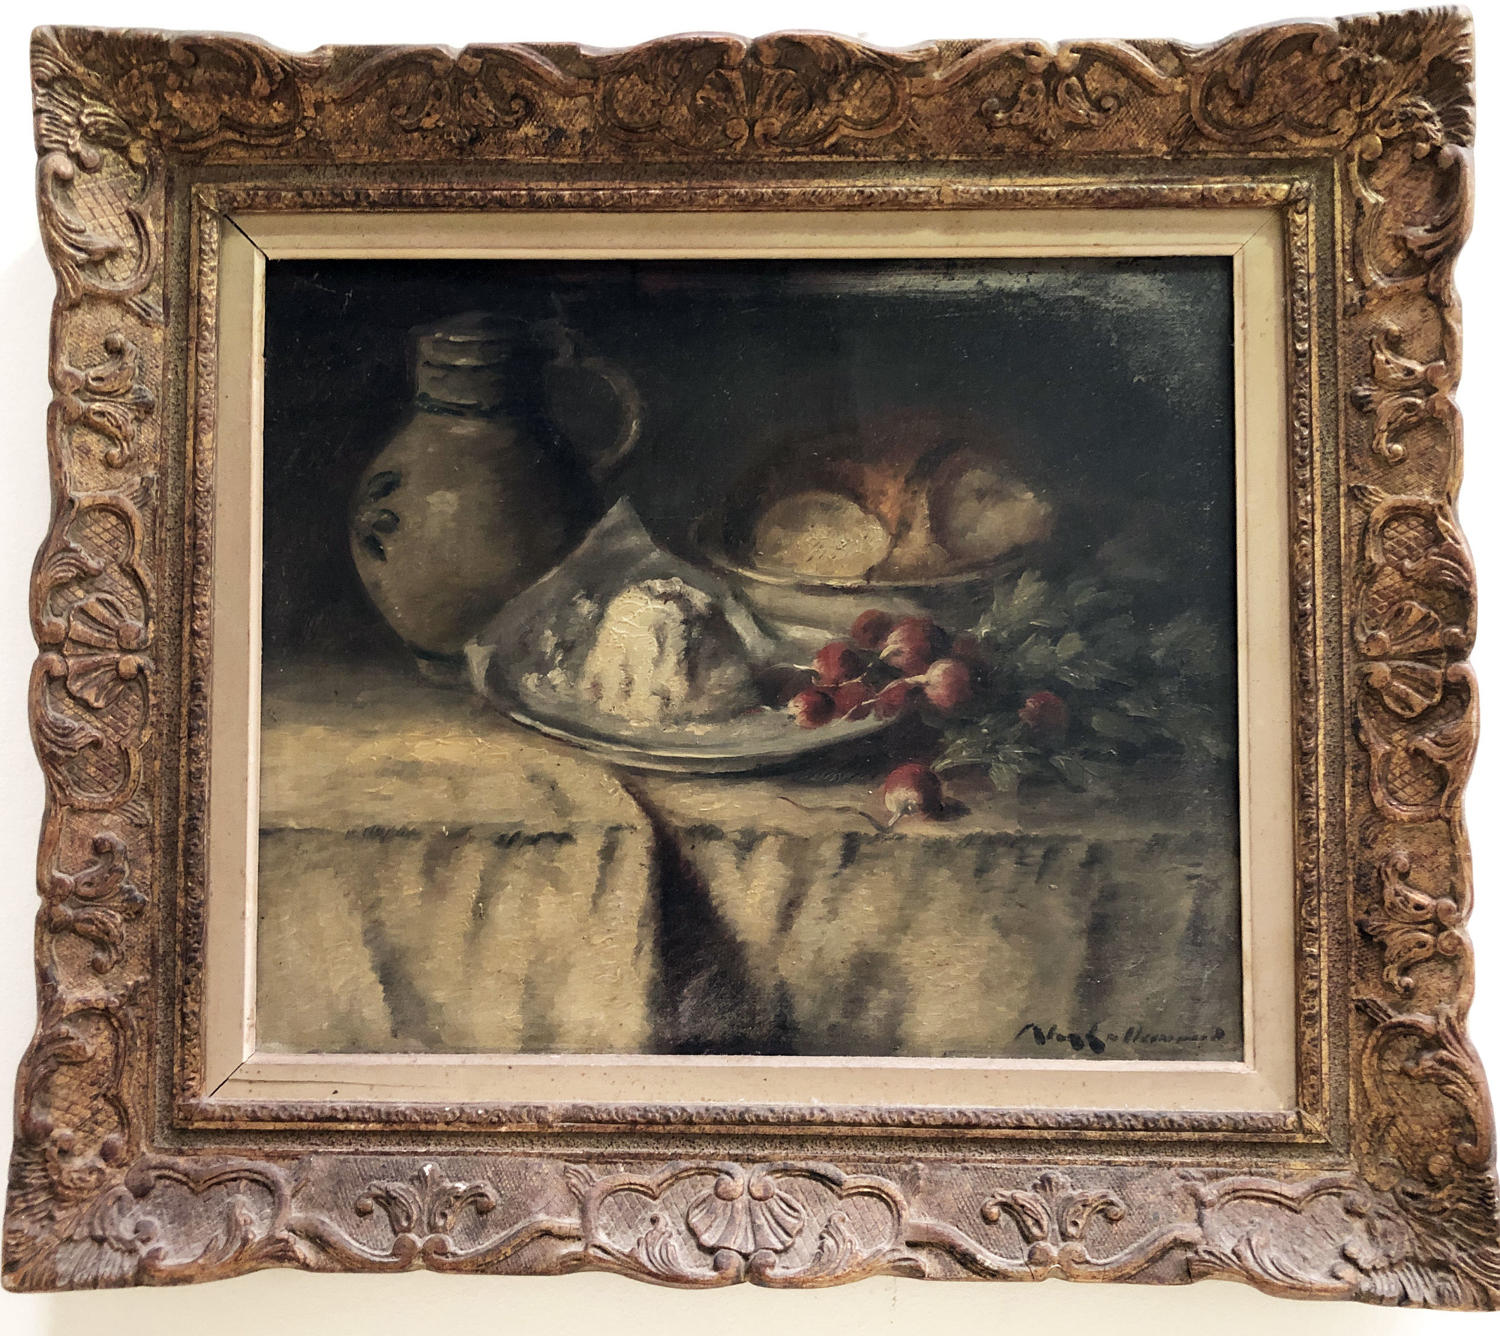 19th c French Still Life - oil on canvas with Radishes